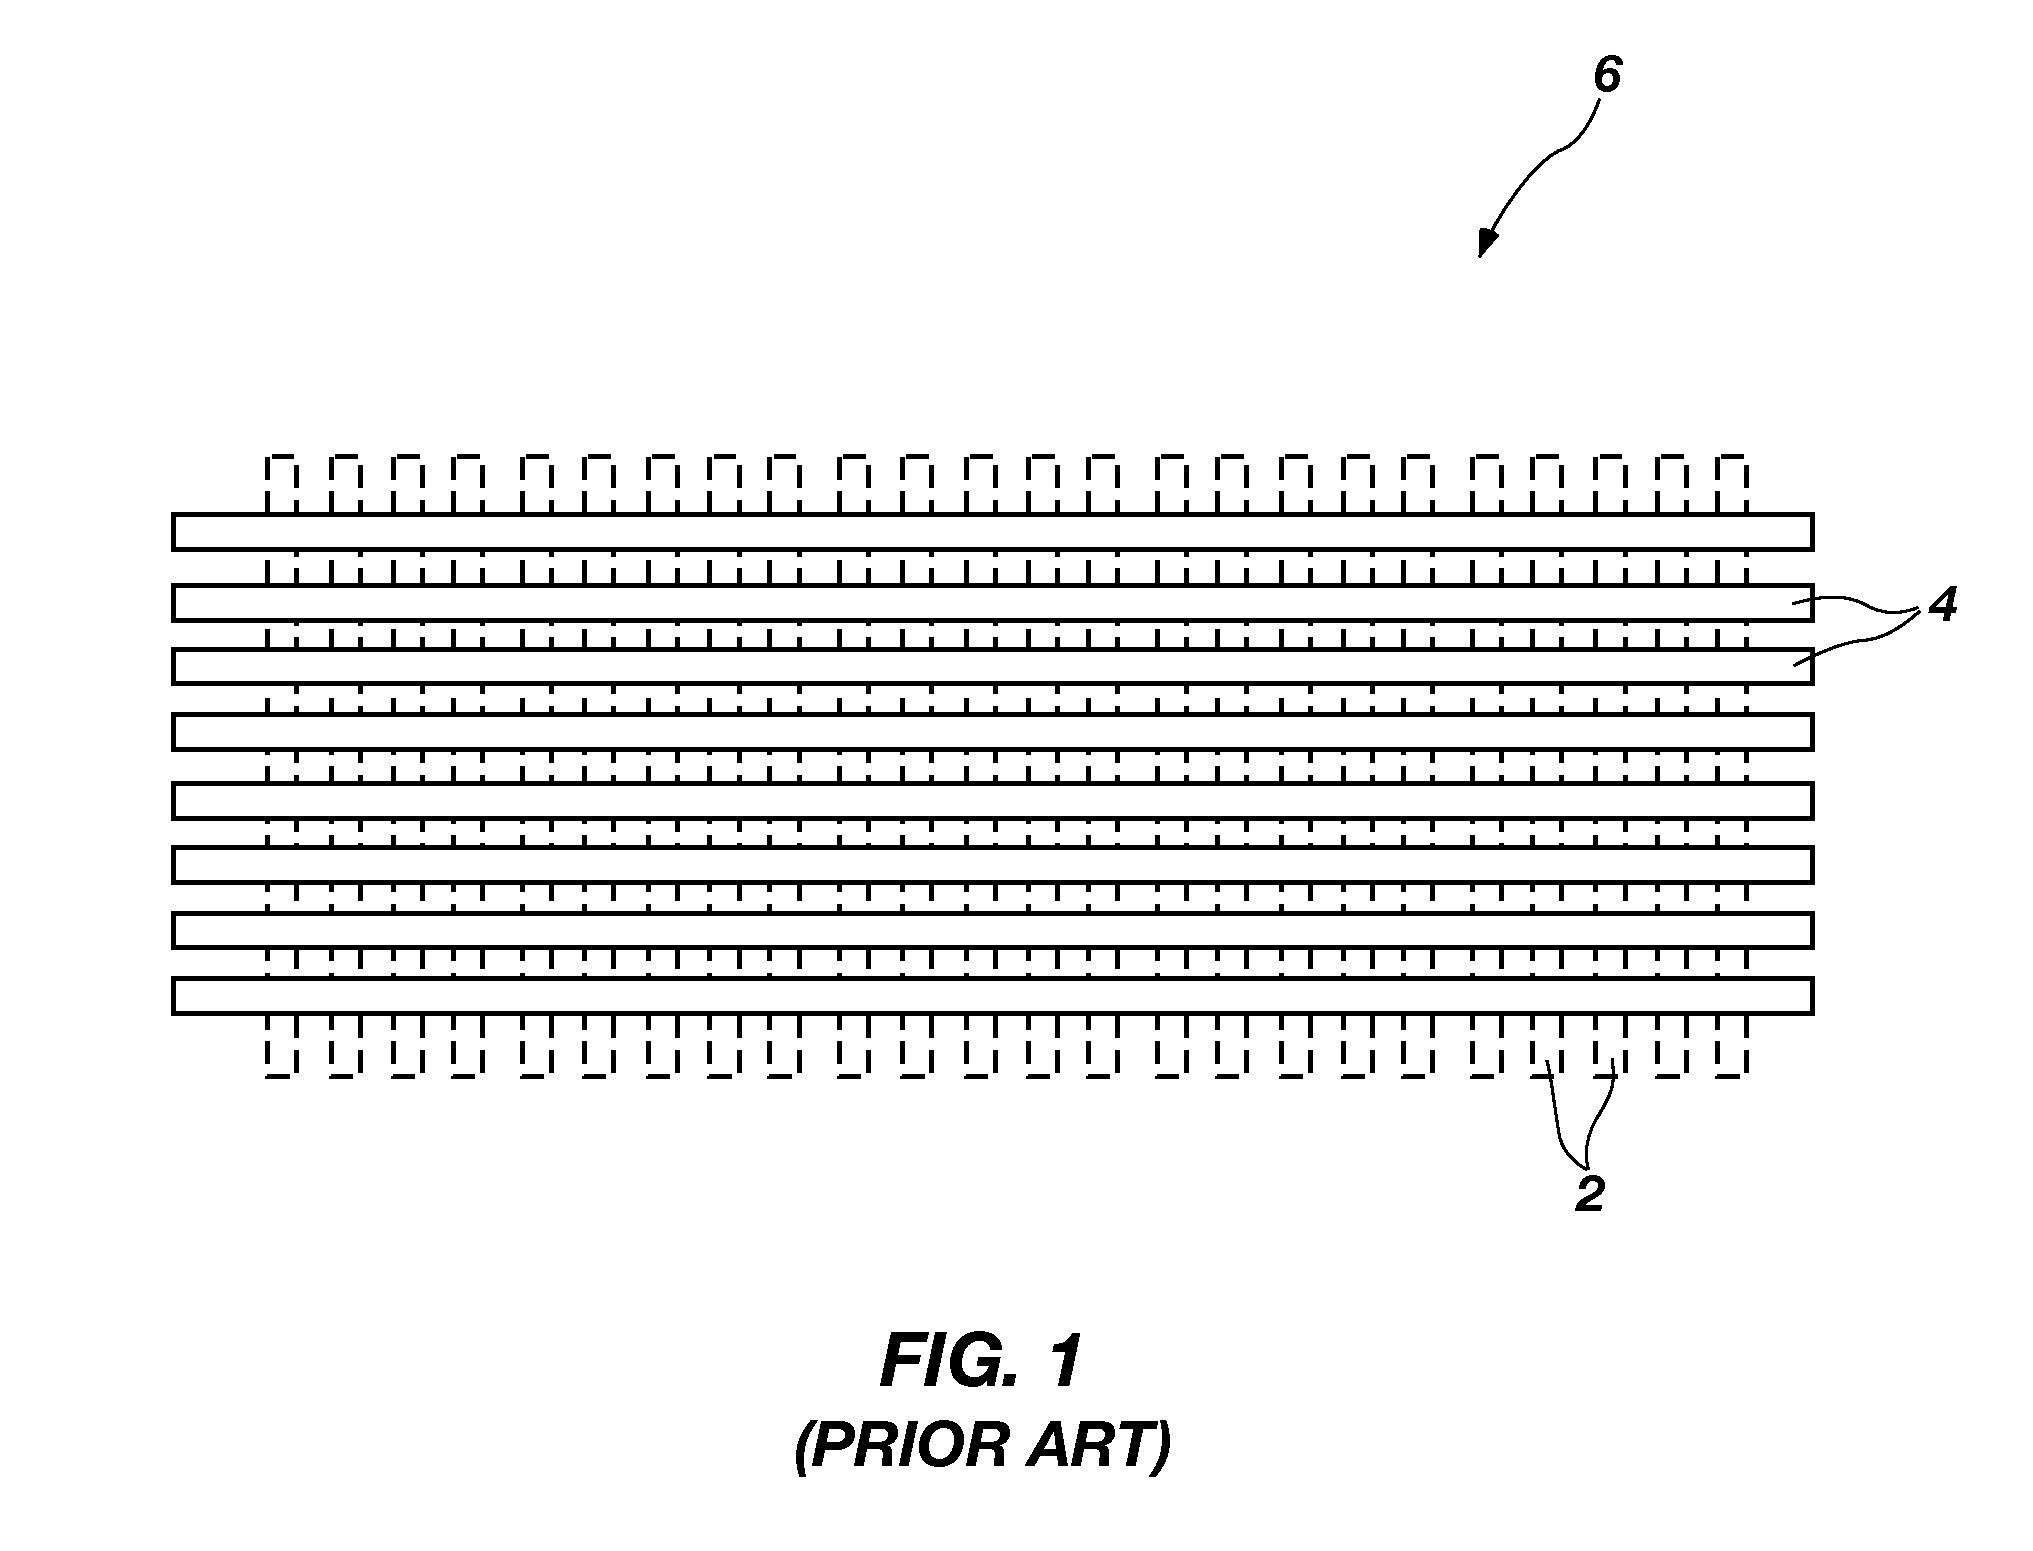 Surface capacitance with area gestures